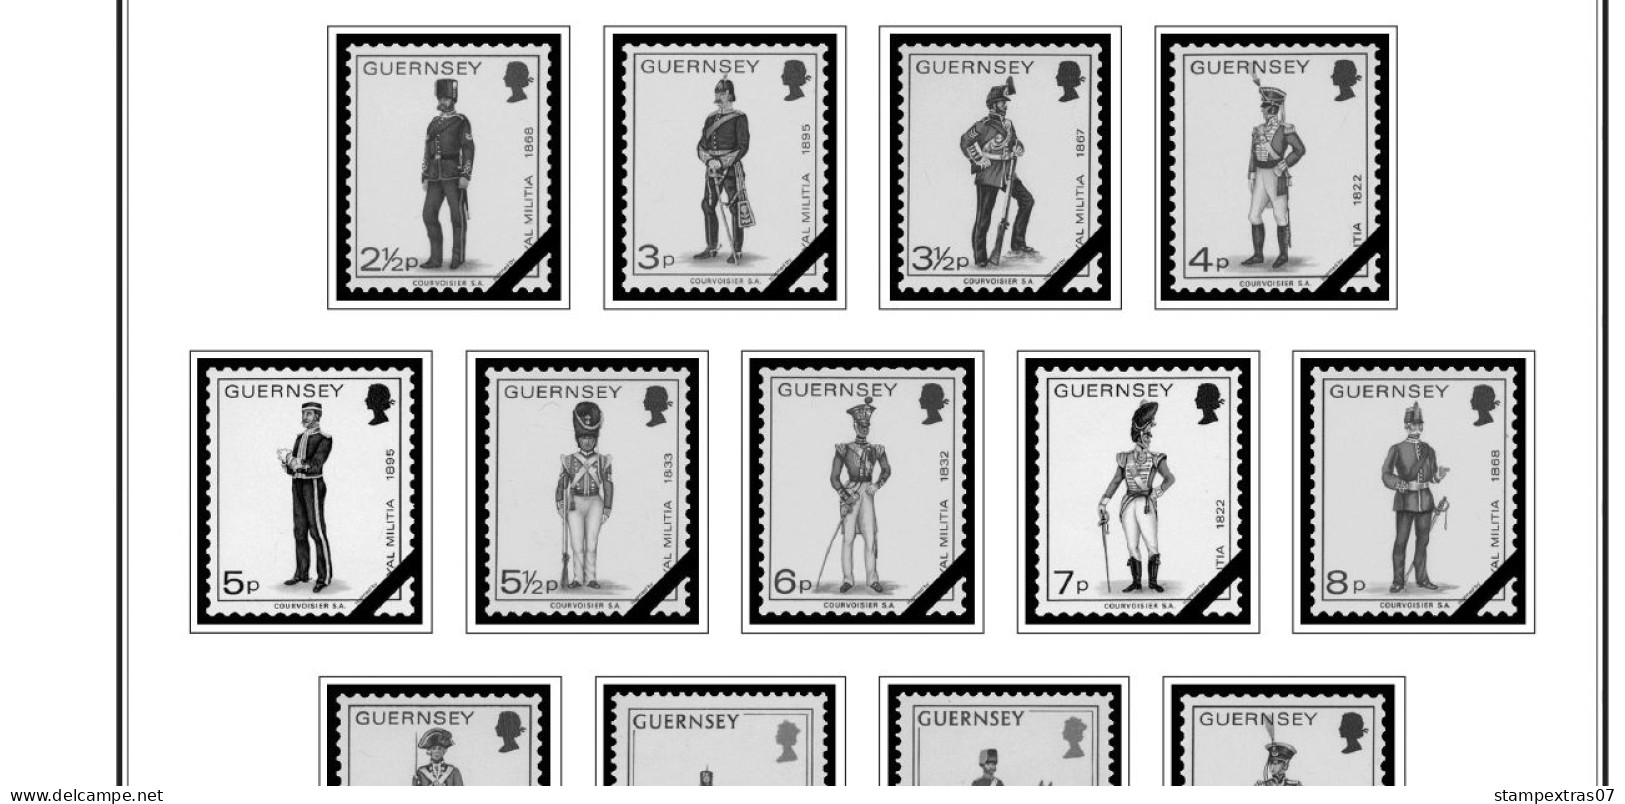 GB GUERNSEY 1958-2010 + 2011- 2020 STAMP ALBUM PAGES (212 B&w Illustrated Pages) - English